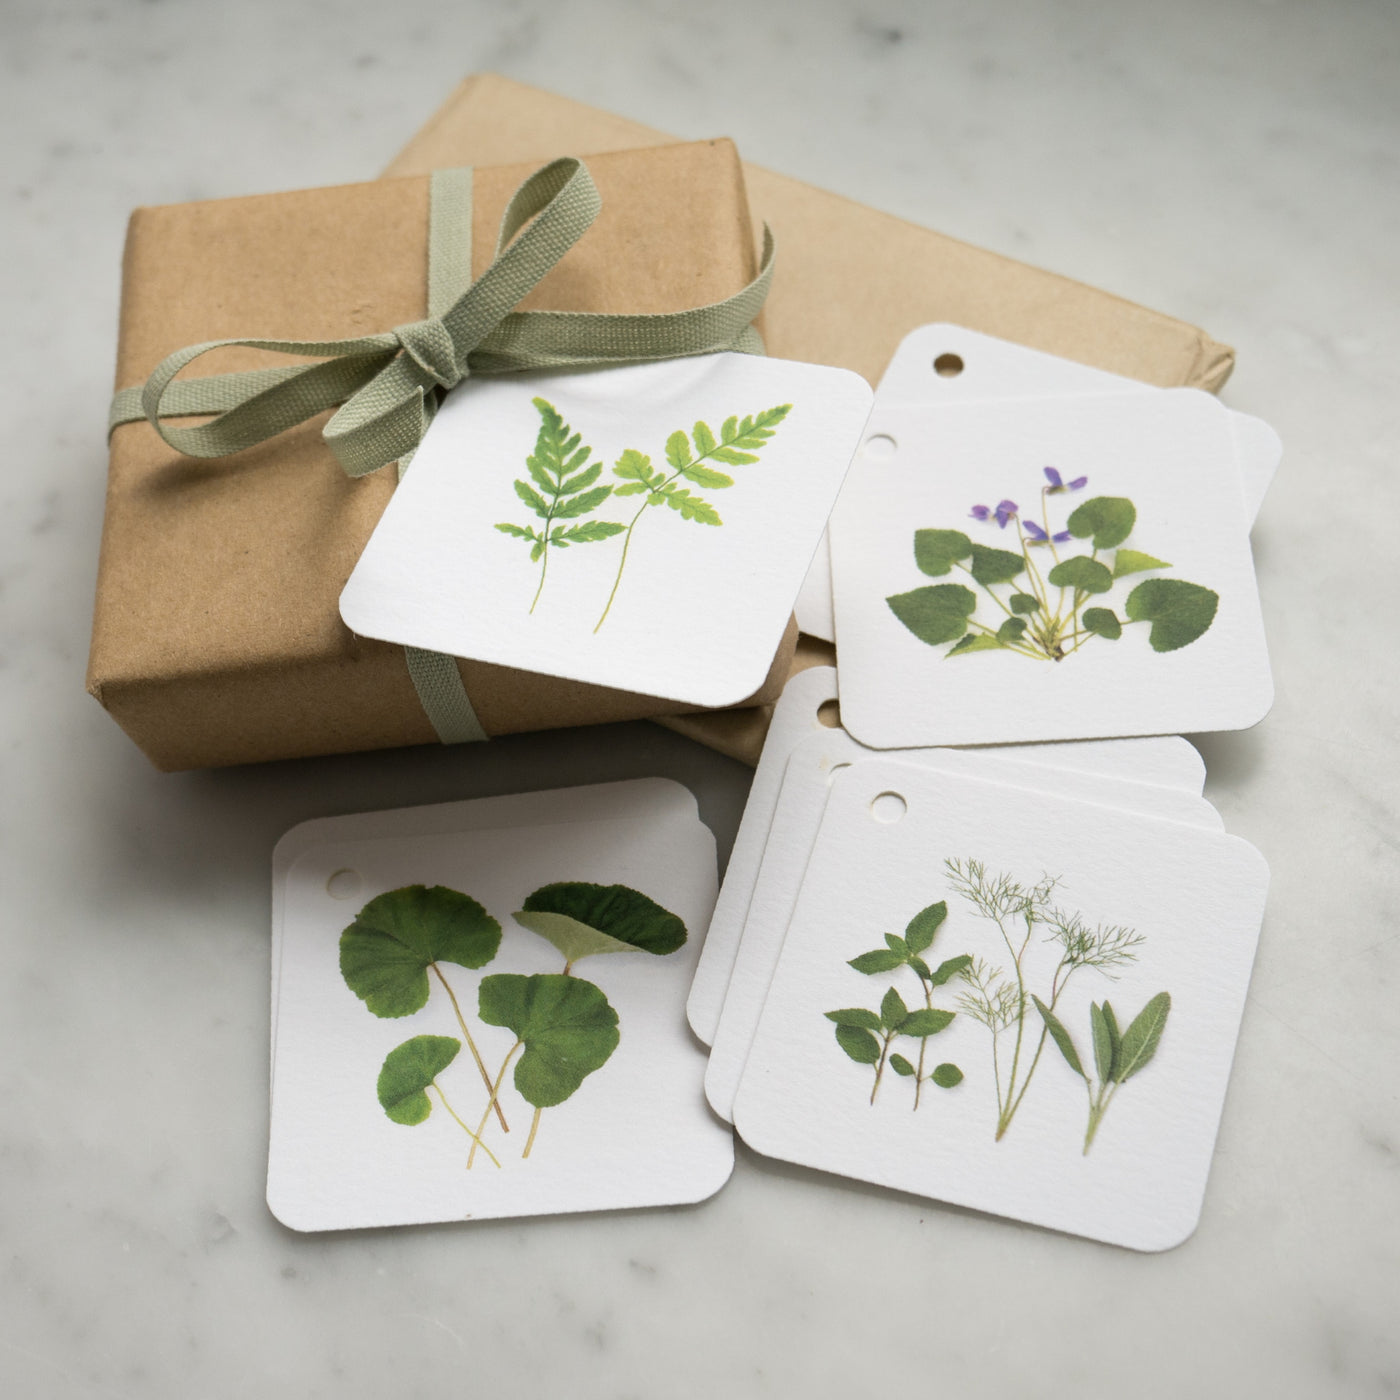 Bottle Branch Foliage and Greens Gift Tags